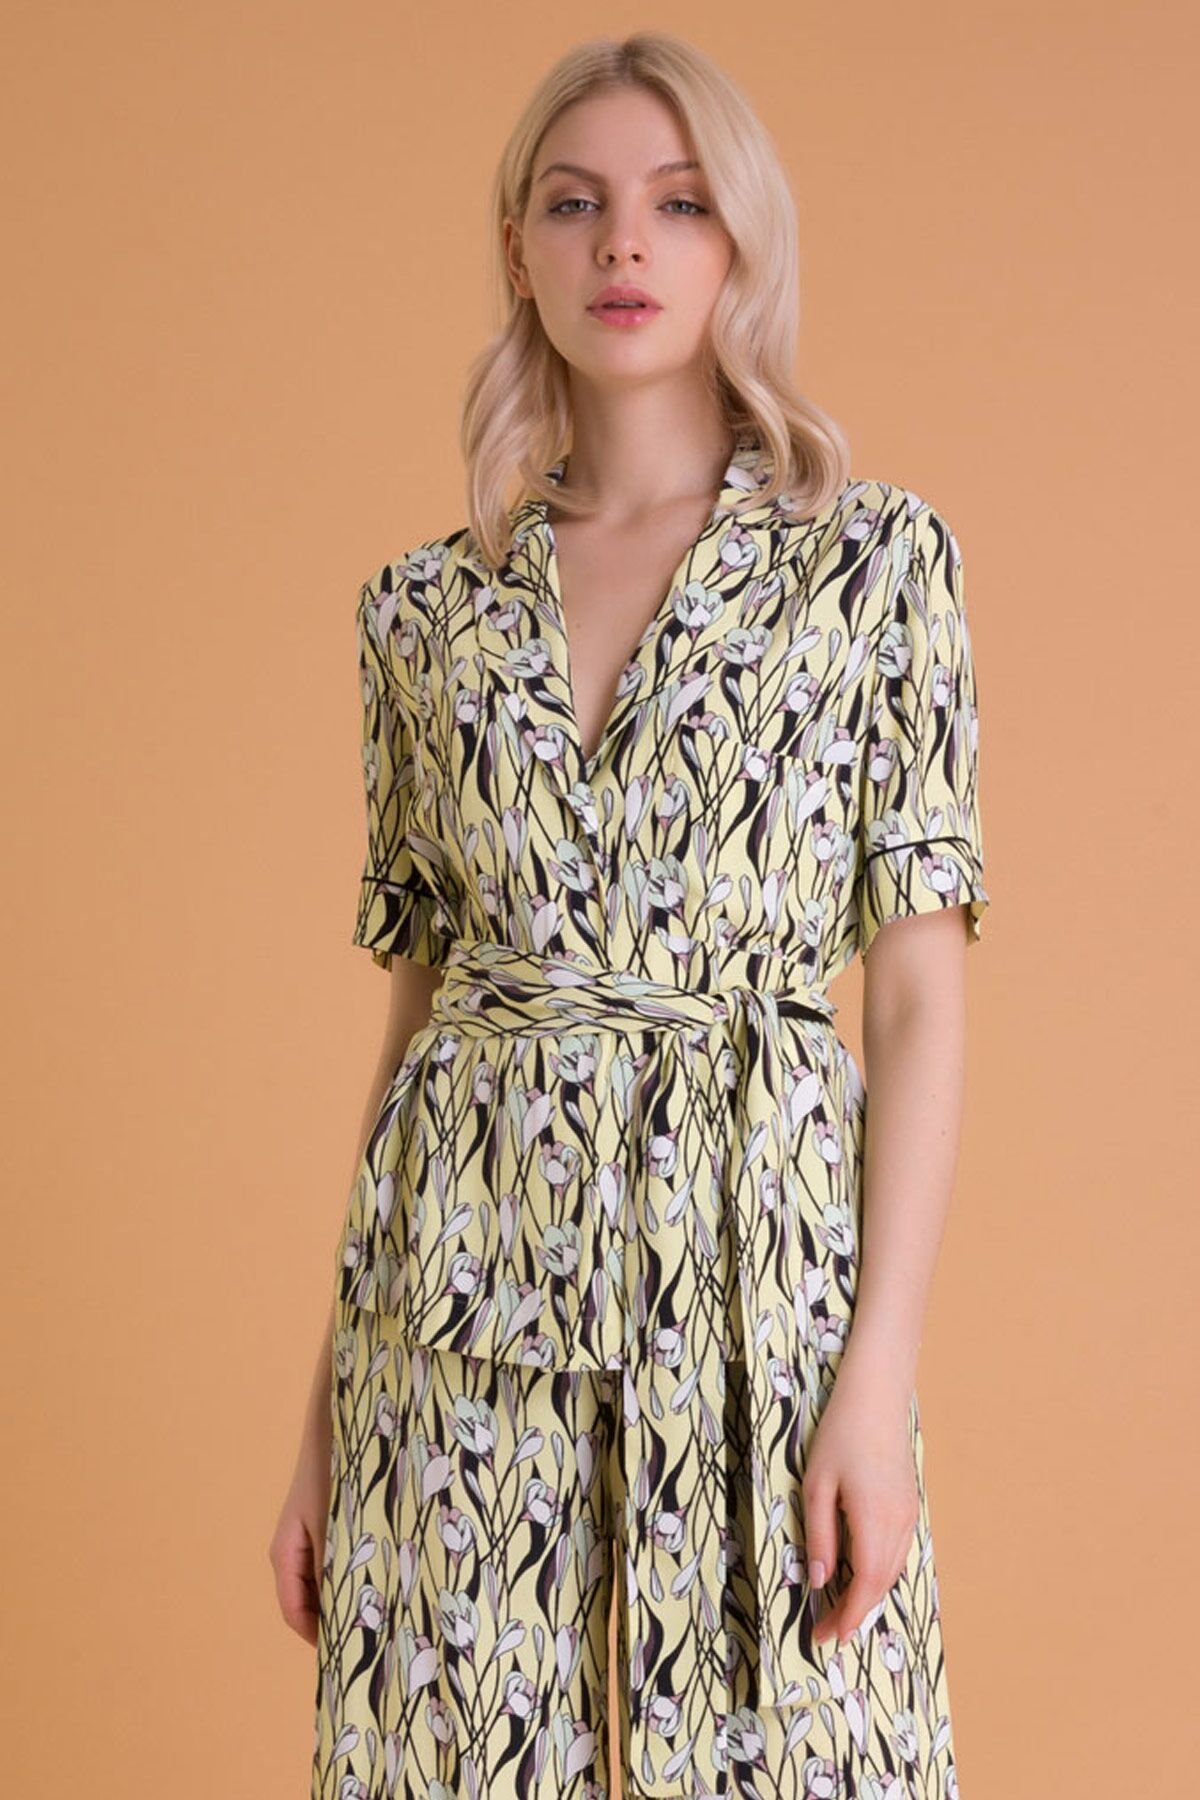 Floral Patterned Short Sleeve Yellow Jacket Blouse